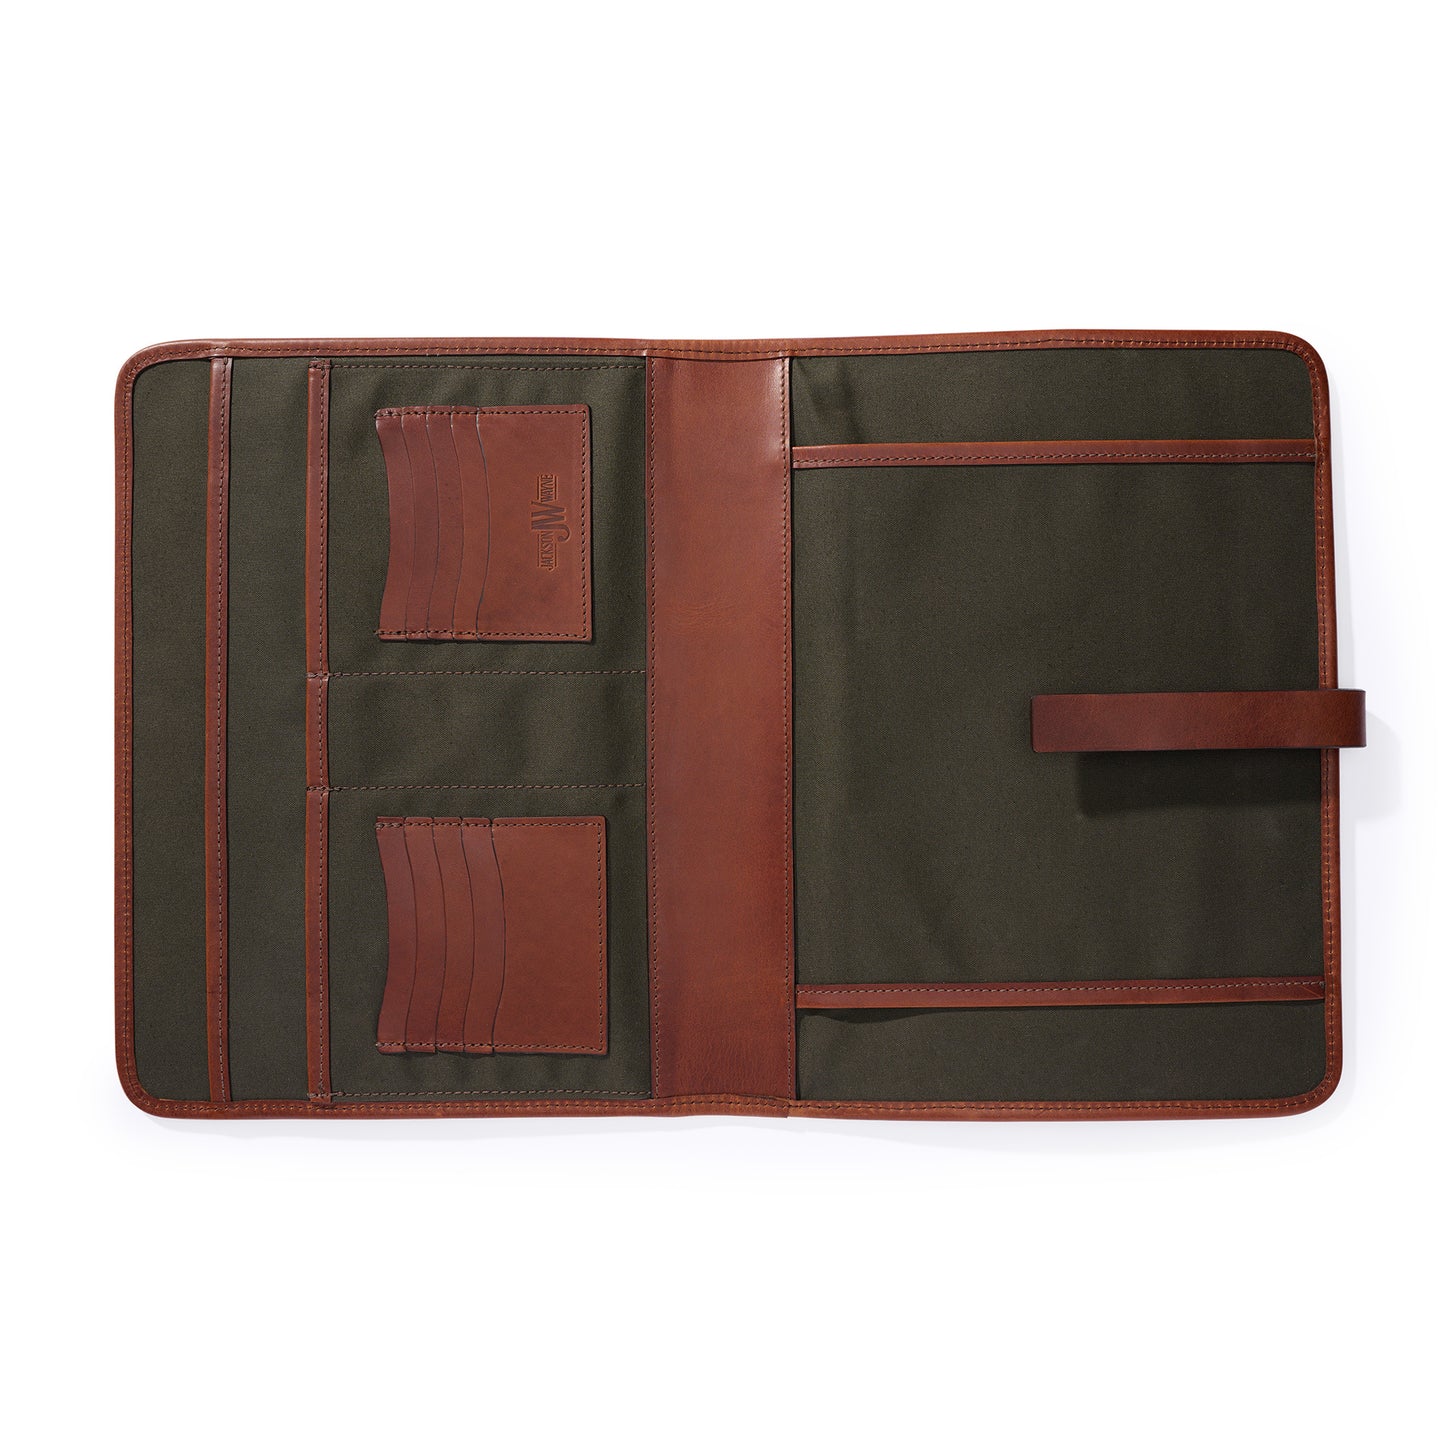 inside full grain leather portfolio ambidextrous orientation for right or left handed - vintage brown leather